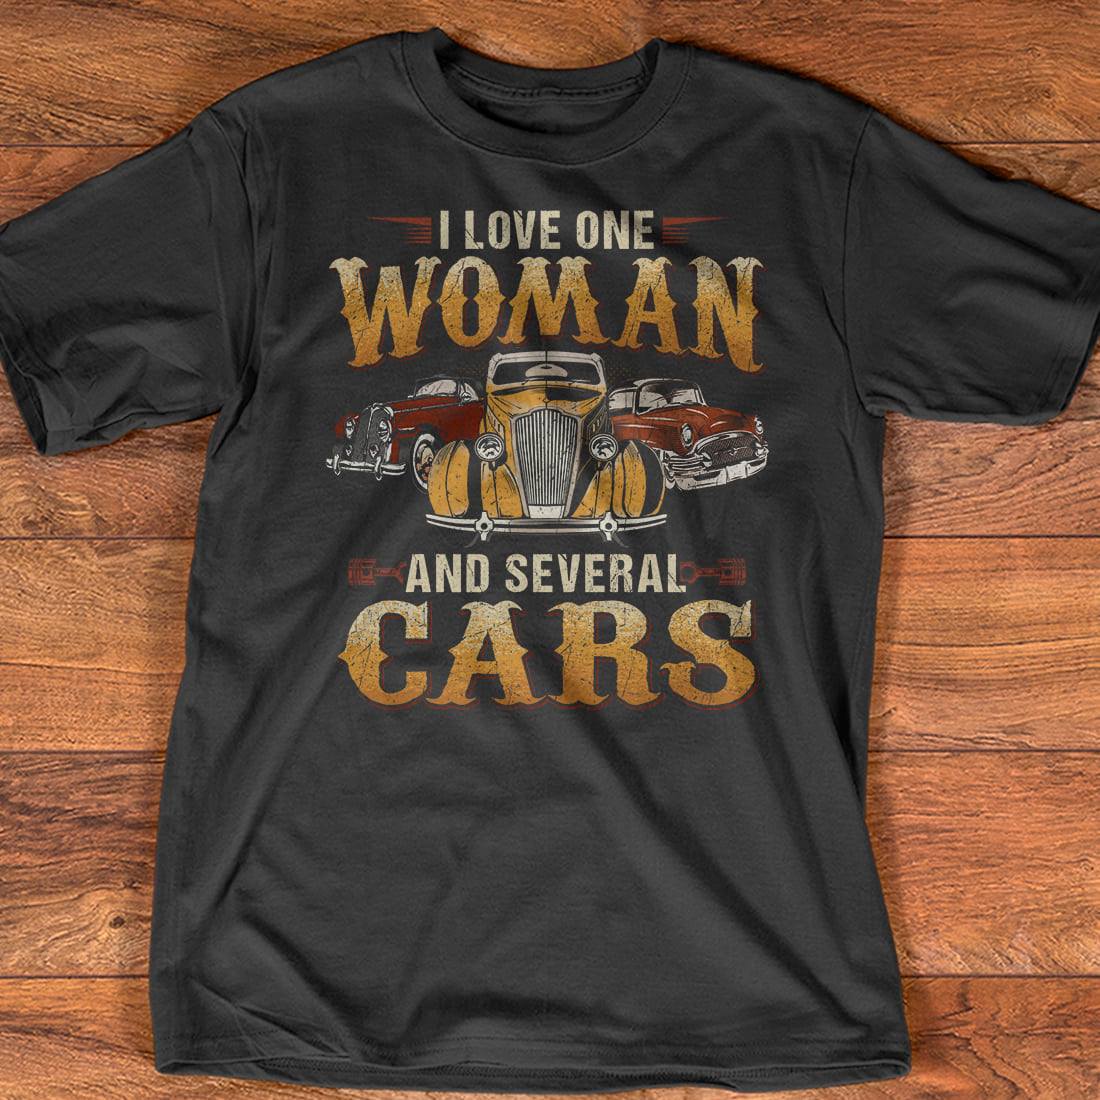 I love one woman and several cars - Hot rods car